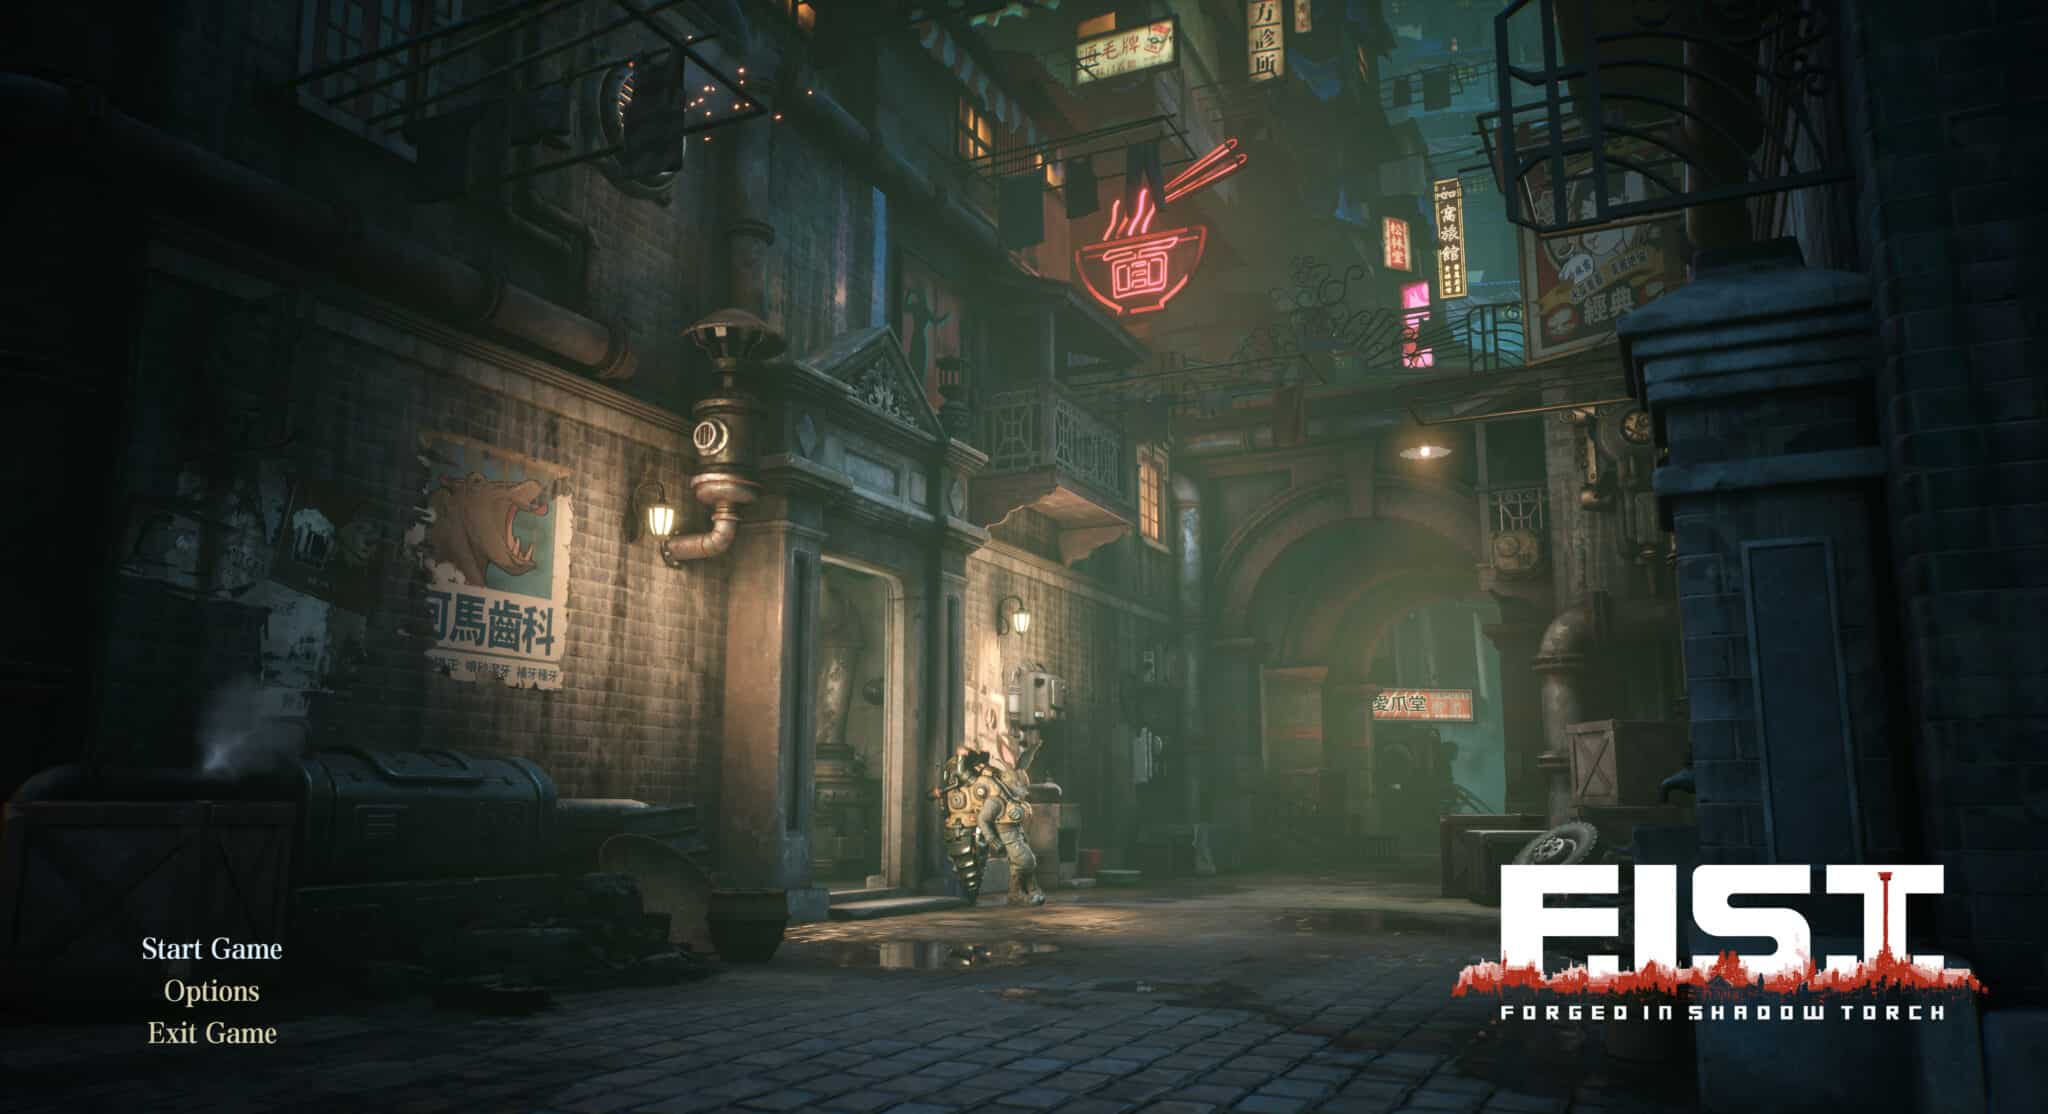 F. I. S. T ganha trailer comparativo com ray tracing | d6c1bd35 fist scaled | married games notícias | f. I. S. T. , f. I. S. T. : forged in shadow torch, geforce, nvidia, ray tracing, tigames network technology limited | fist ganha trailer